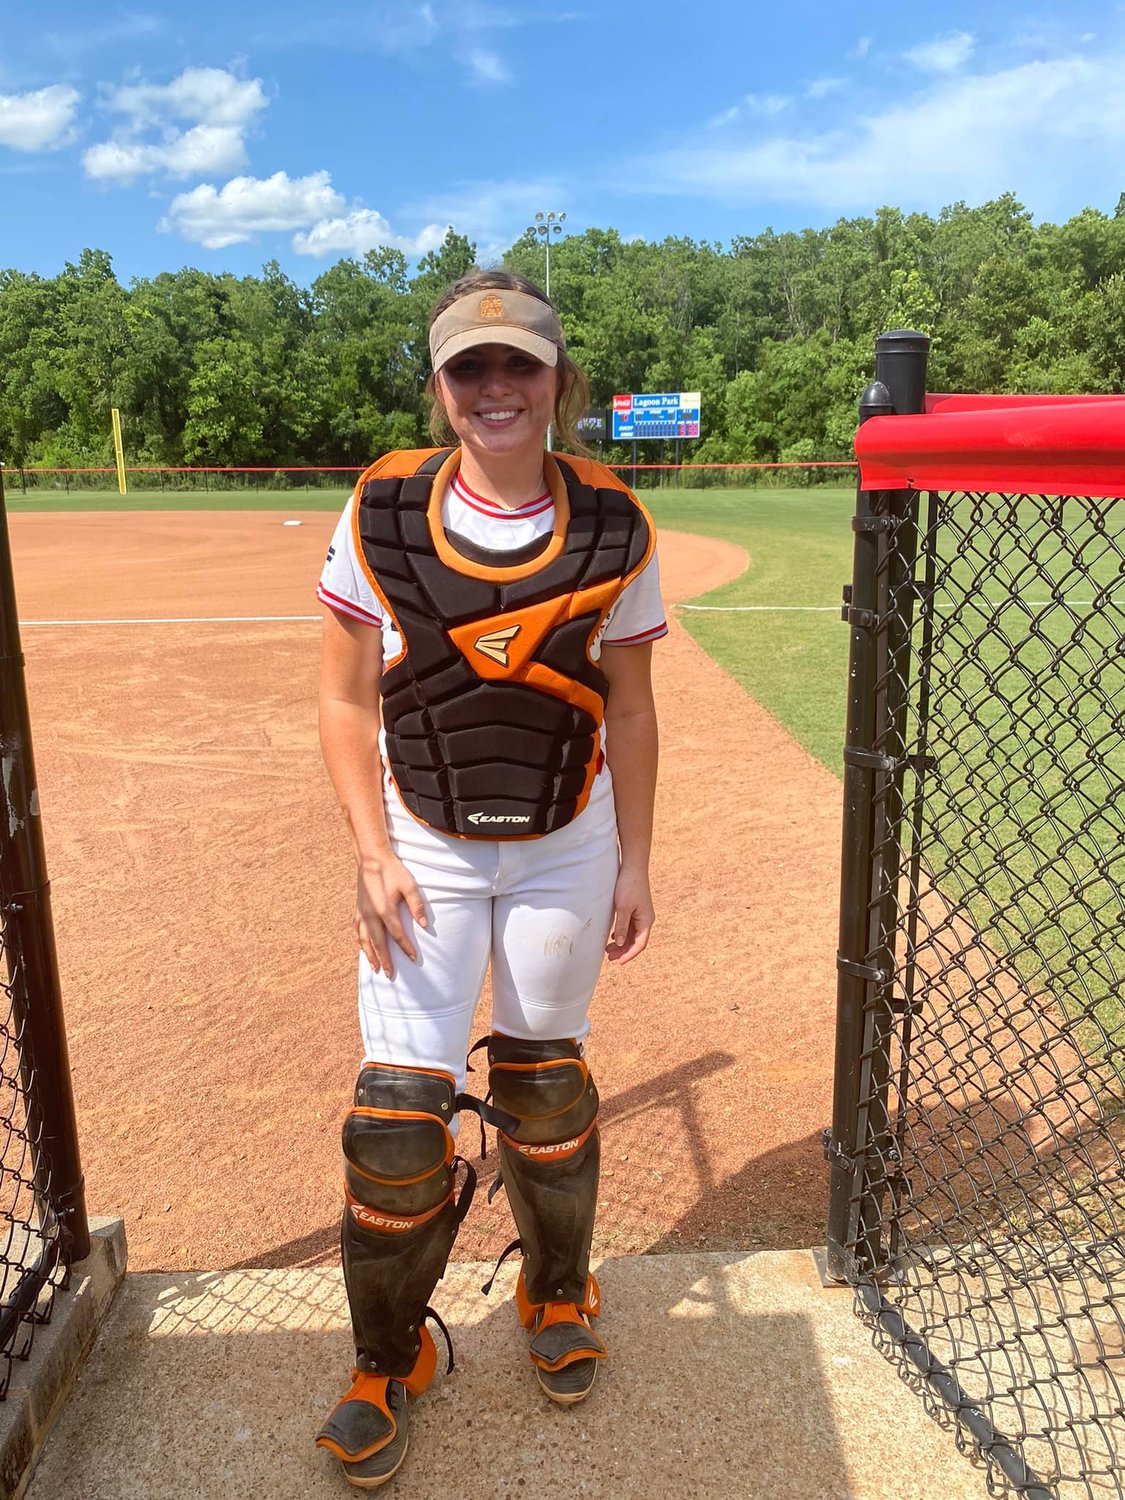 Baldwin County High’s Emma Weatherford was behind the plate for both games of the softball doubleheader as part of the AHSAA North-South All-Star Game last week in Montgomery.